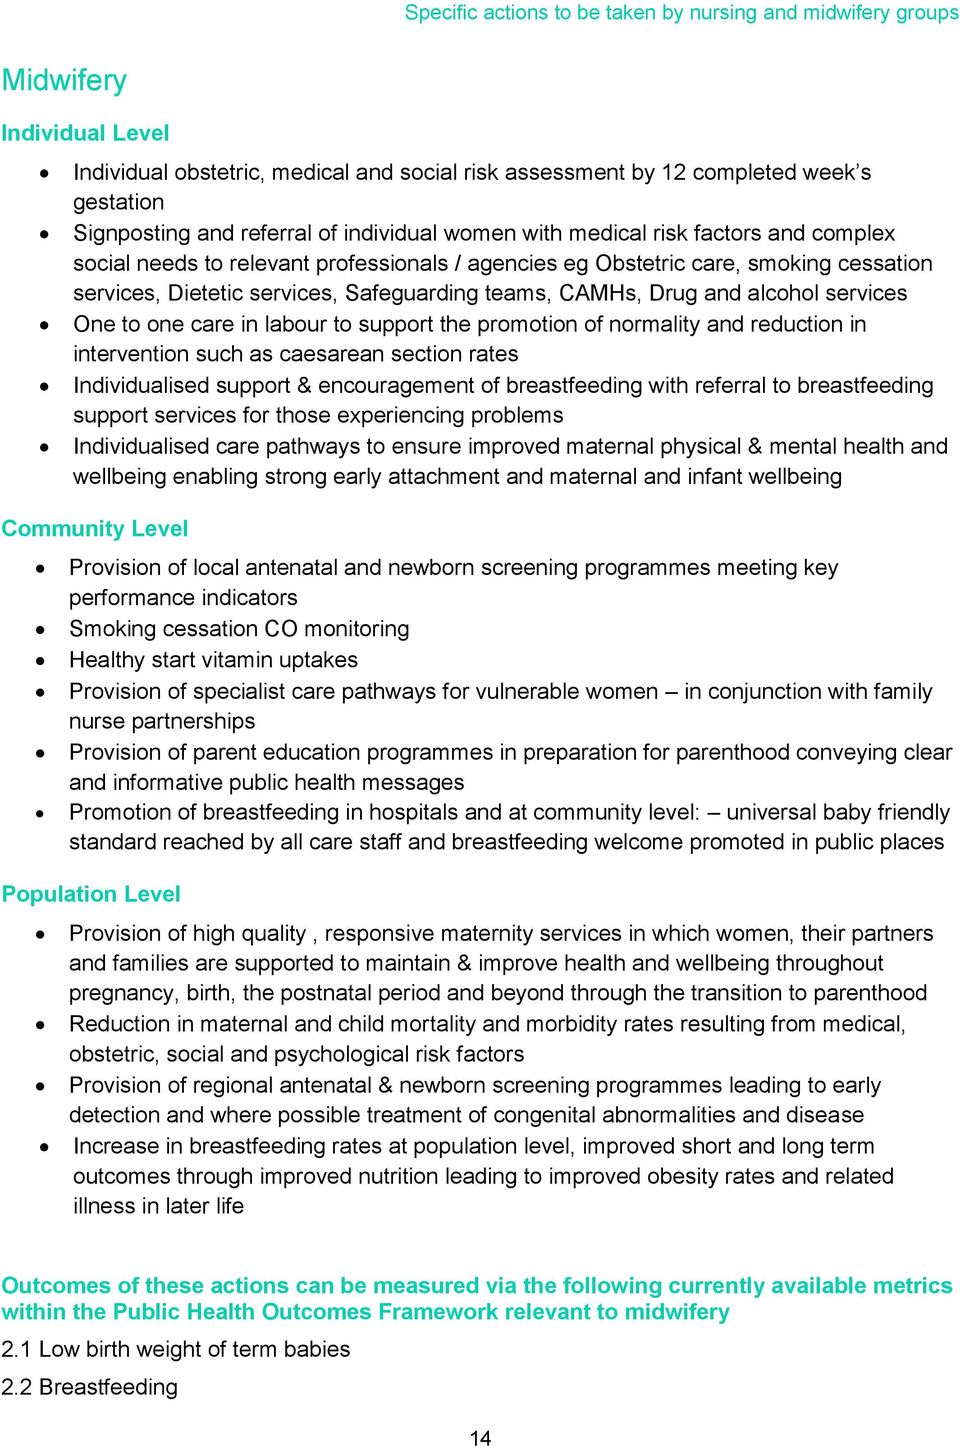 alcohol services One to one care in labour to support the promotion of normality and reduction in intervention such as caesarean section rates Individualised support & encouragement of breastfeeding